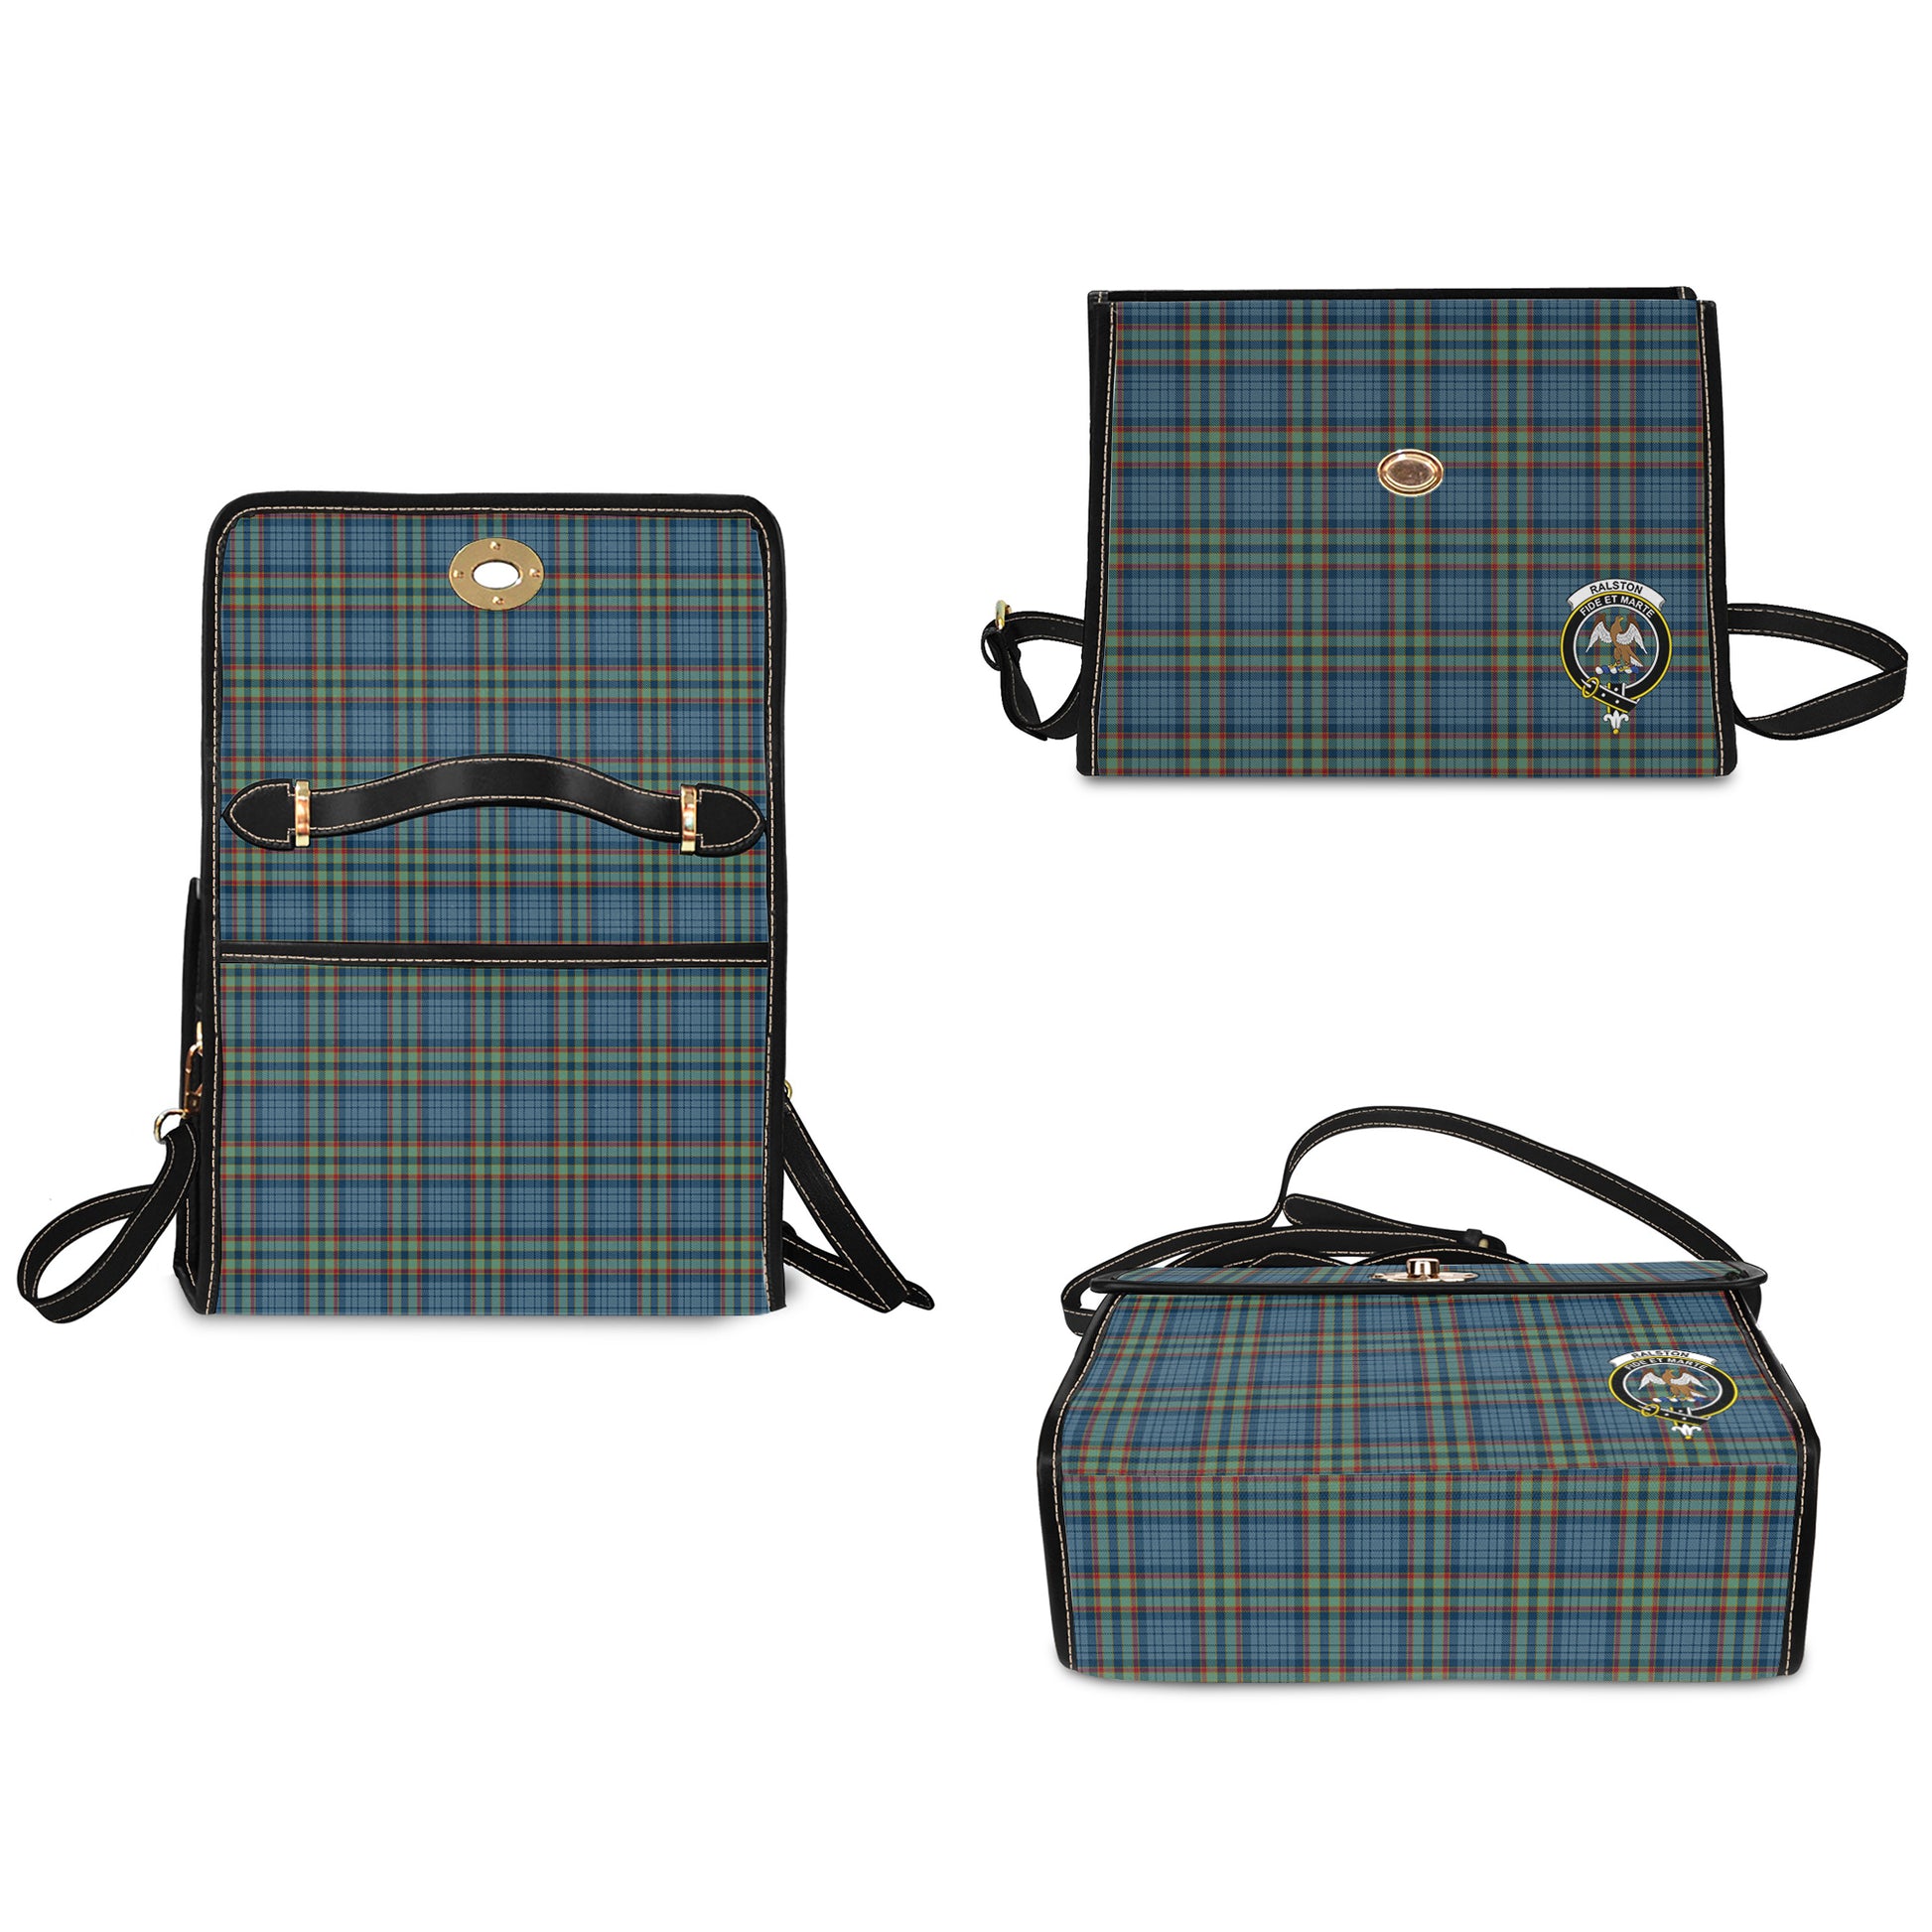 ralston-uk-tartan-leather-strap-waterproof-canvas-bag-with-family-crest